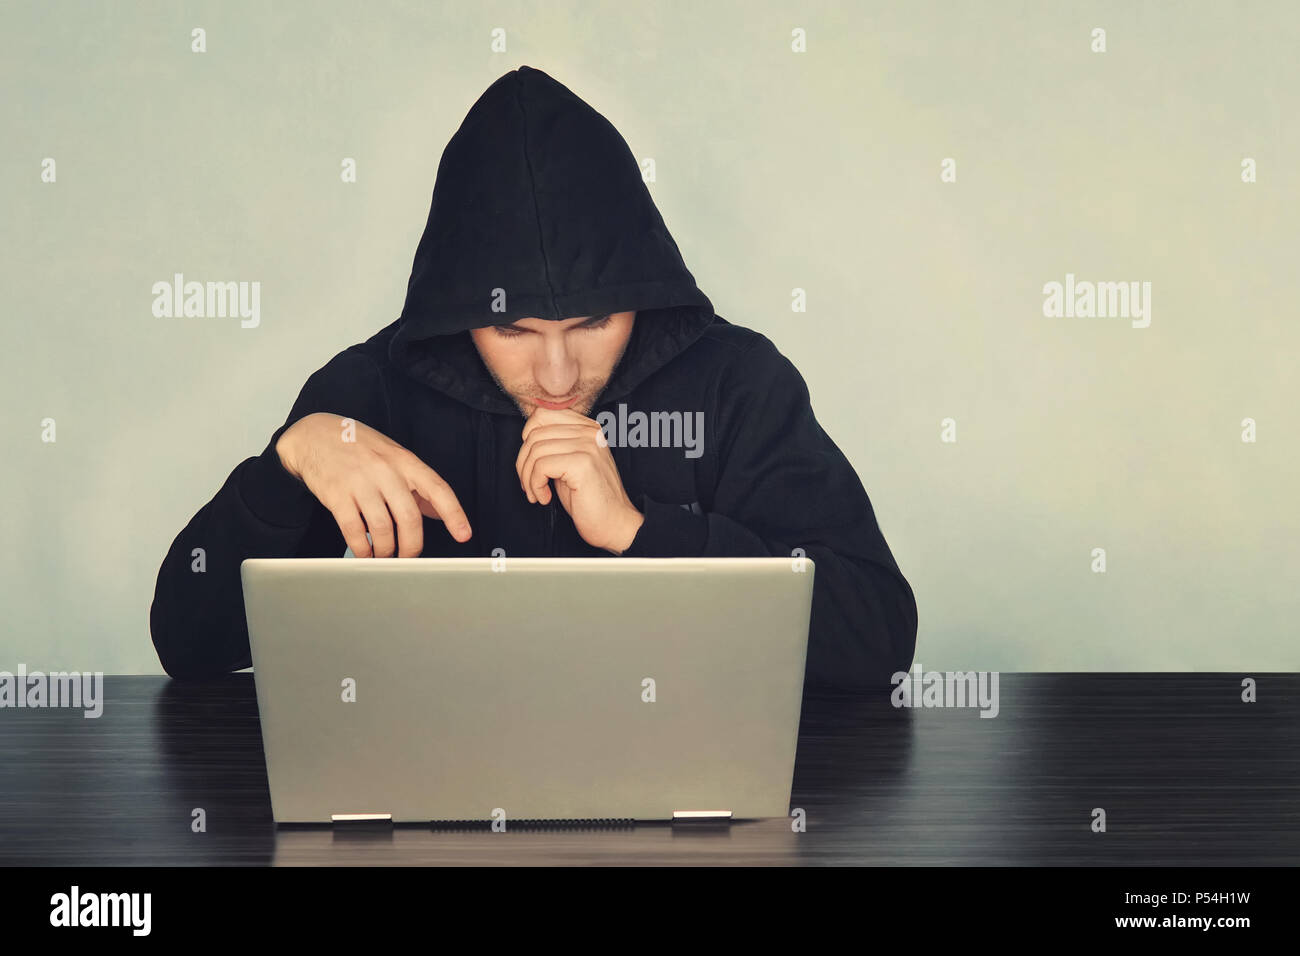 Black masked hacker in the black long sleeve shirt is sitting on the desk in front of laptop and thinking somethings. He is looking at laptop. Blur ba Stock Photo